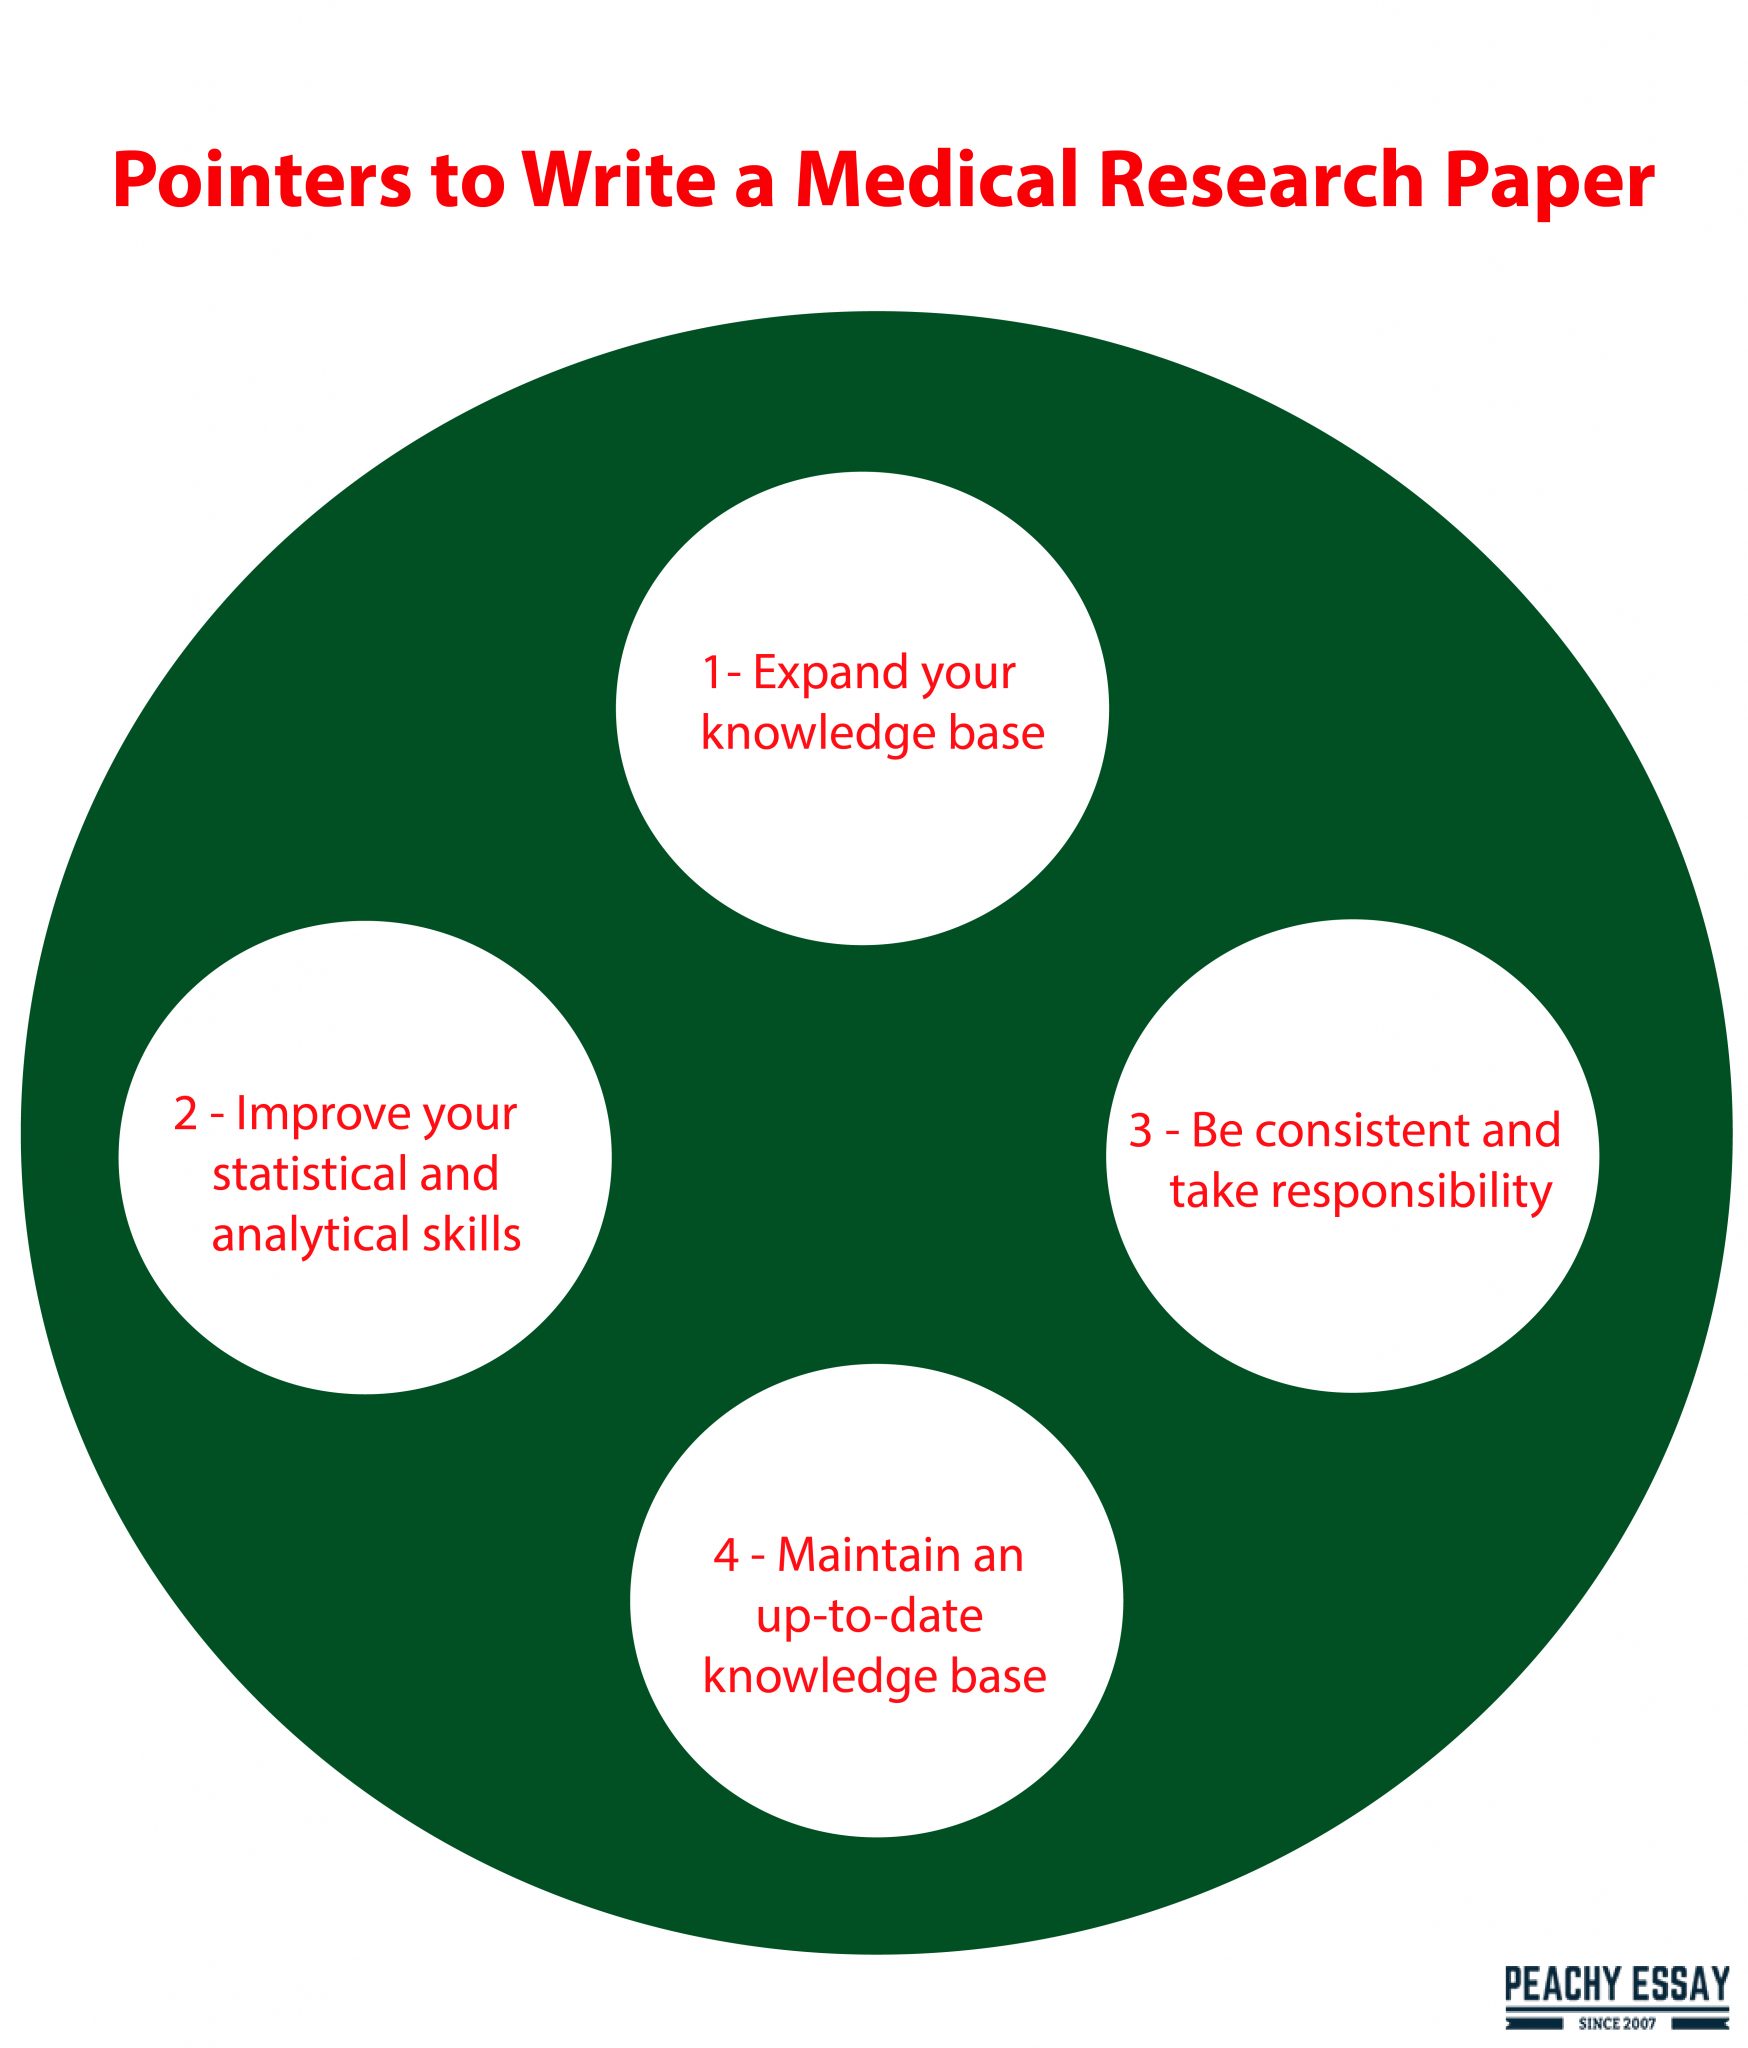 medical research paper writing course